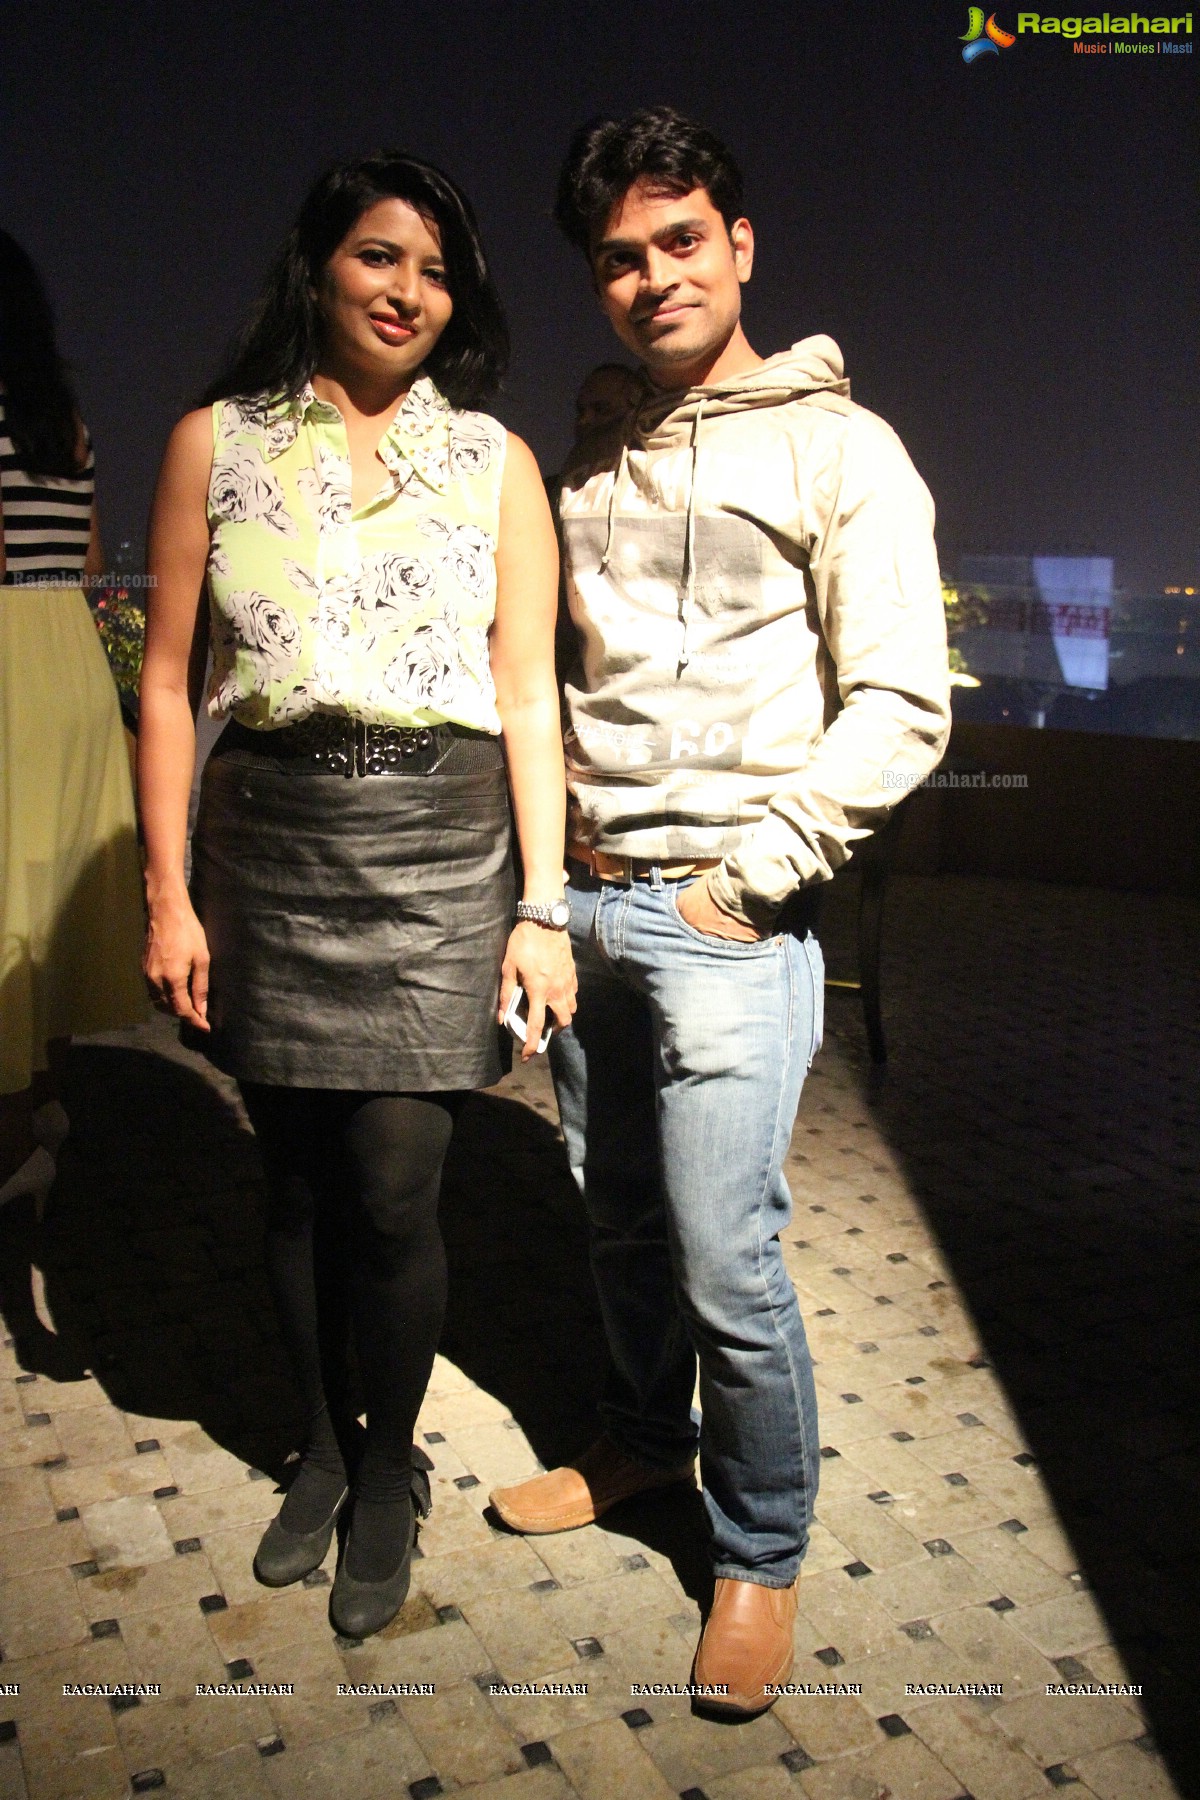 Priyanka and Ankit's Induction Party at Marriott Hyderabad